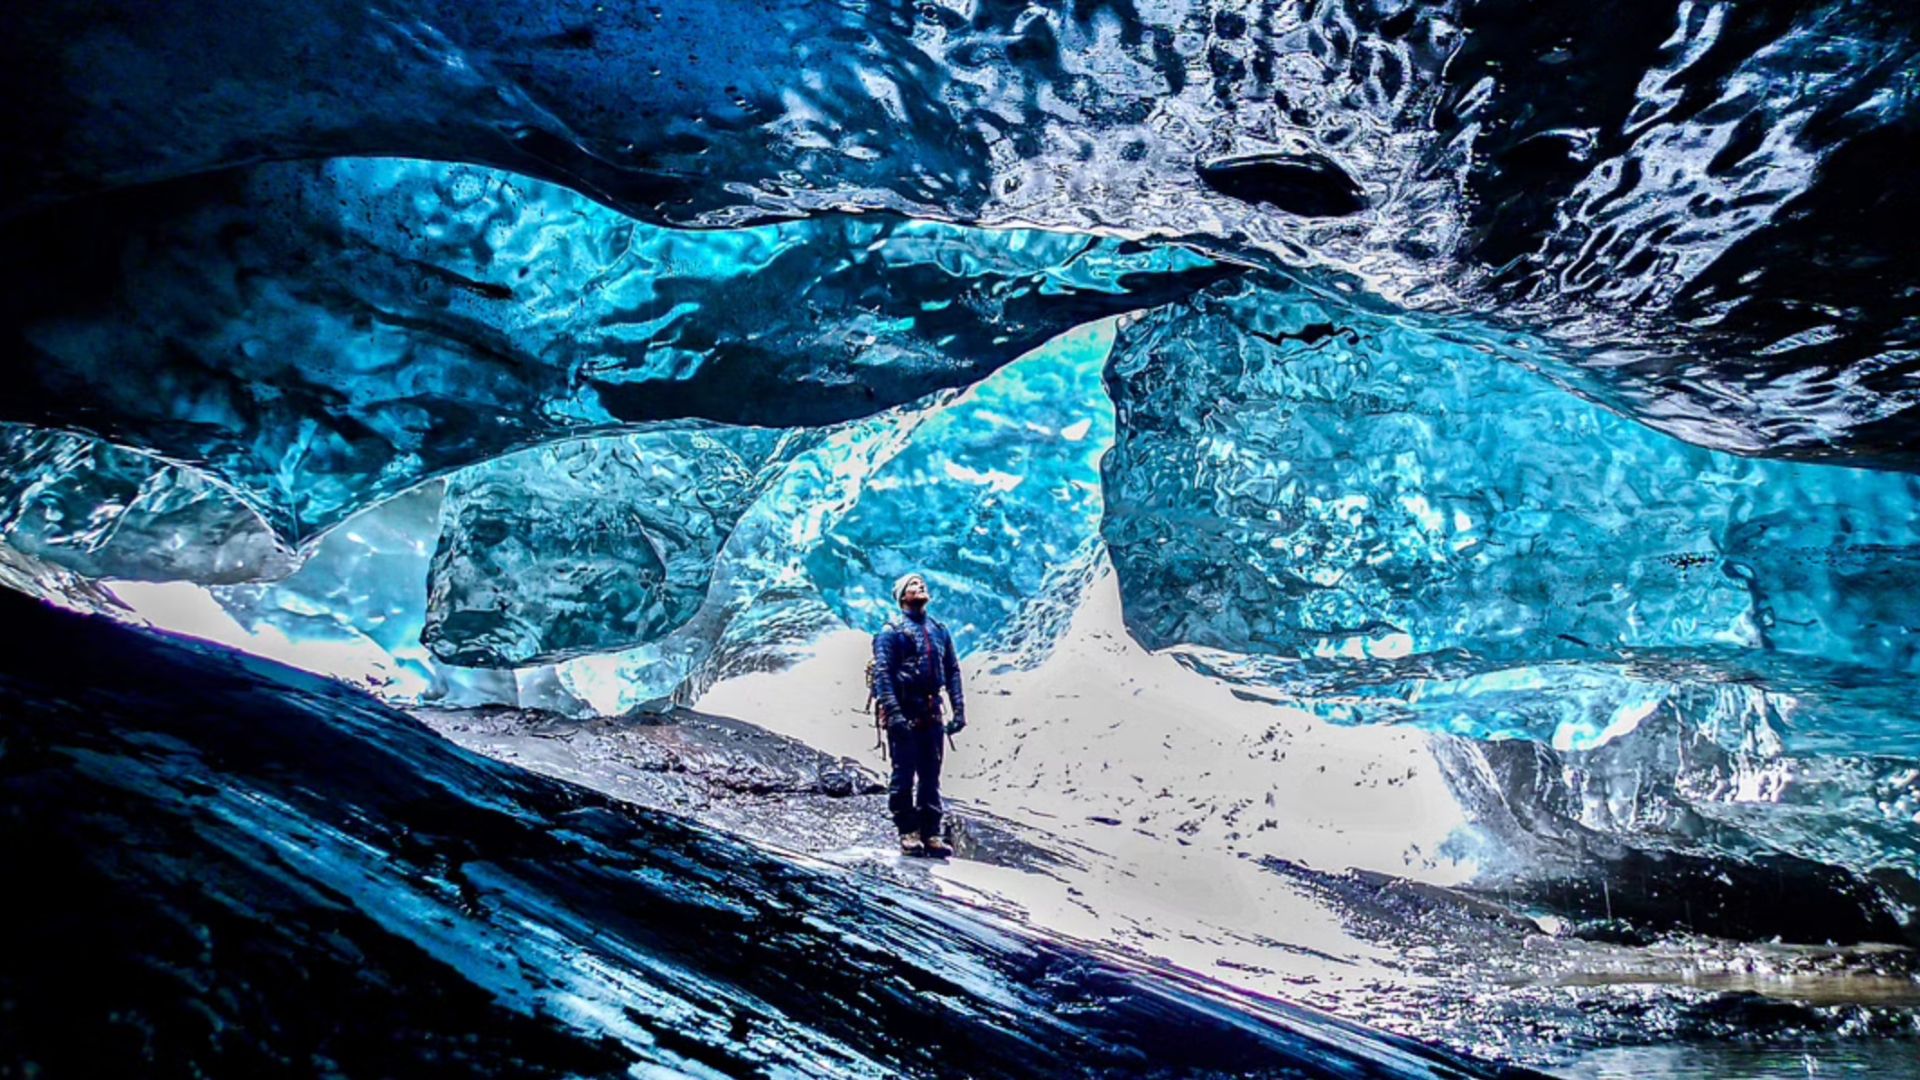 Inside the Ice Cave in Iceland